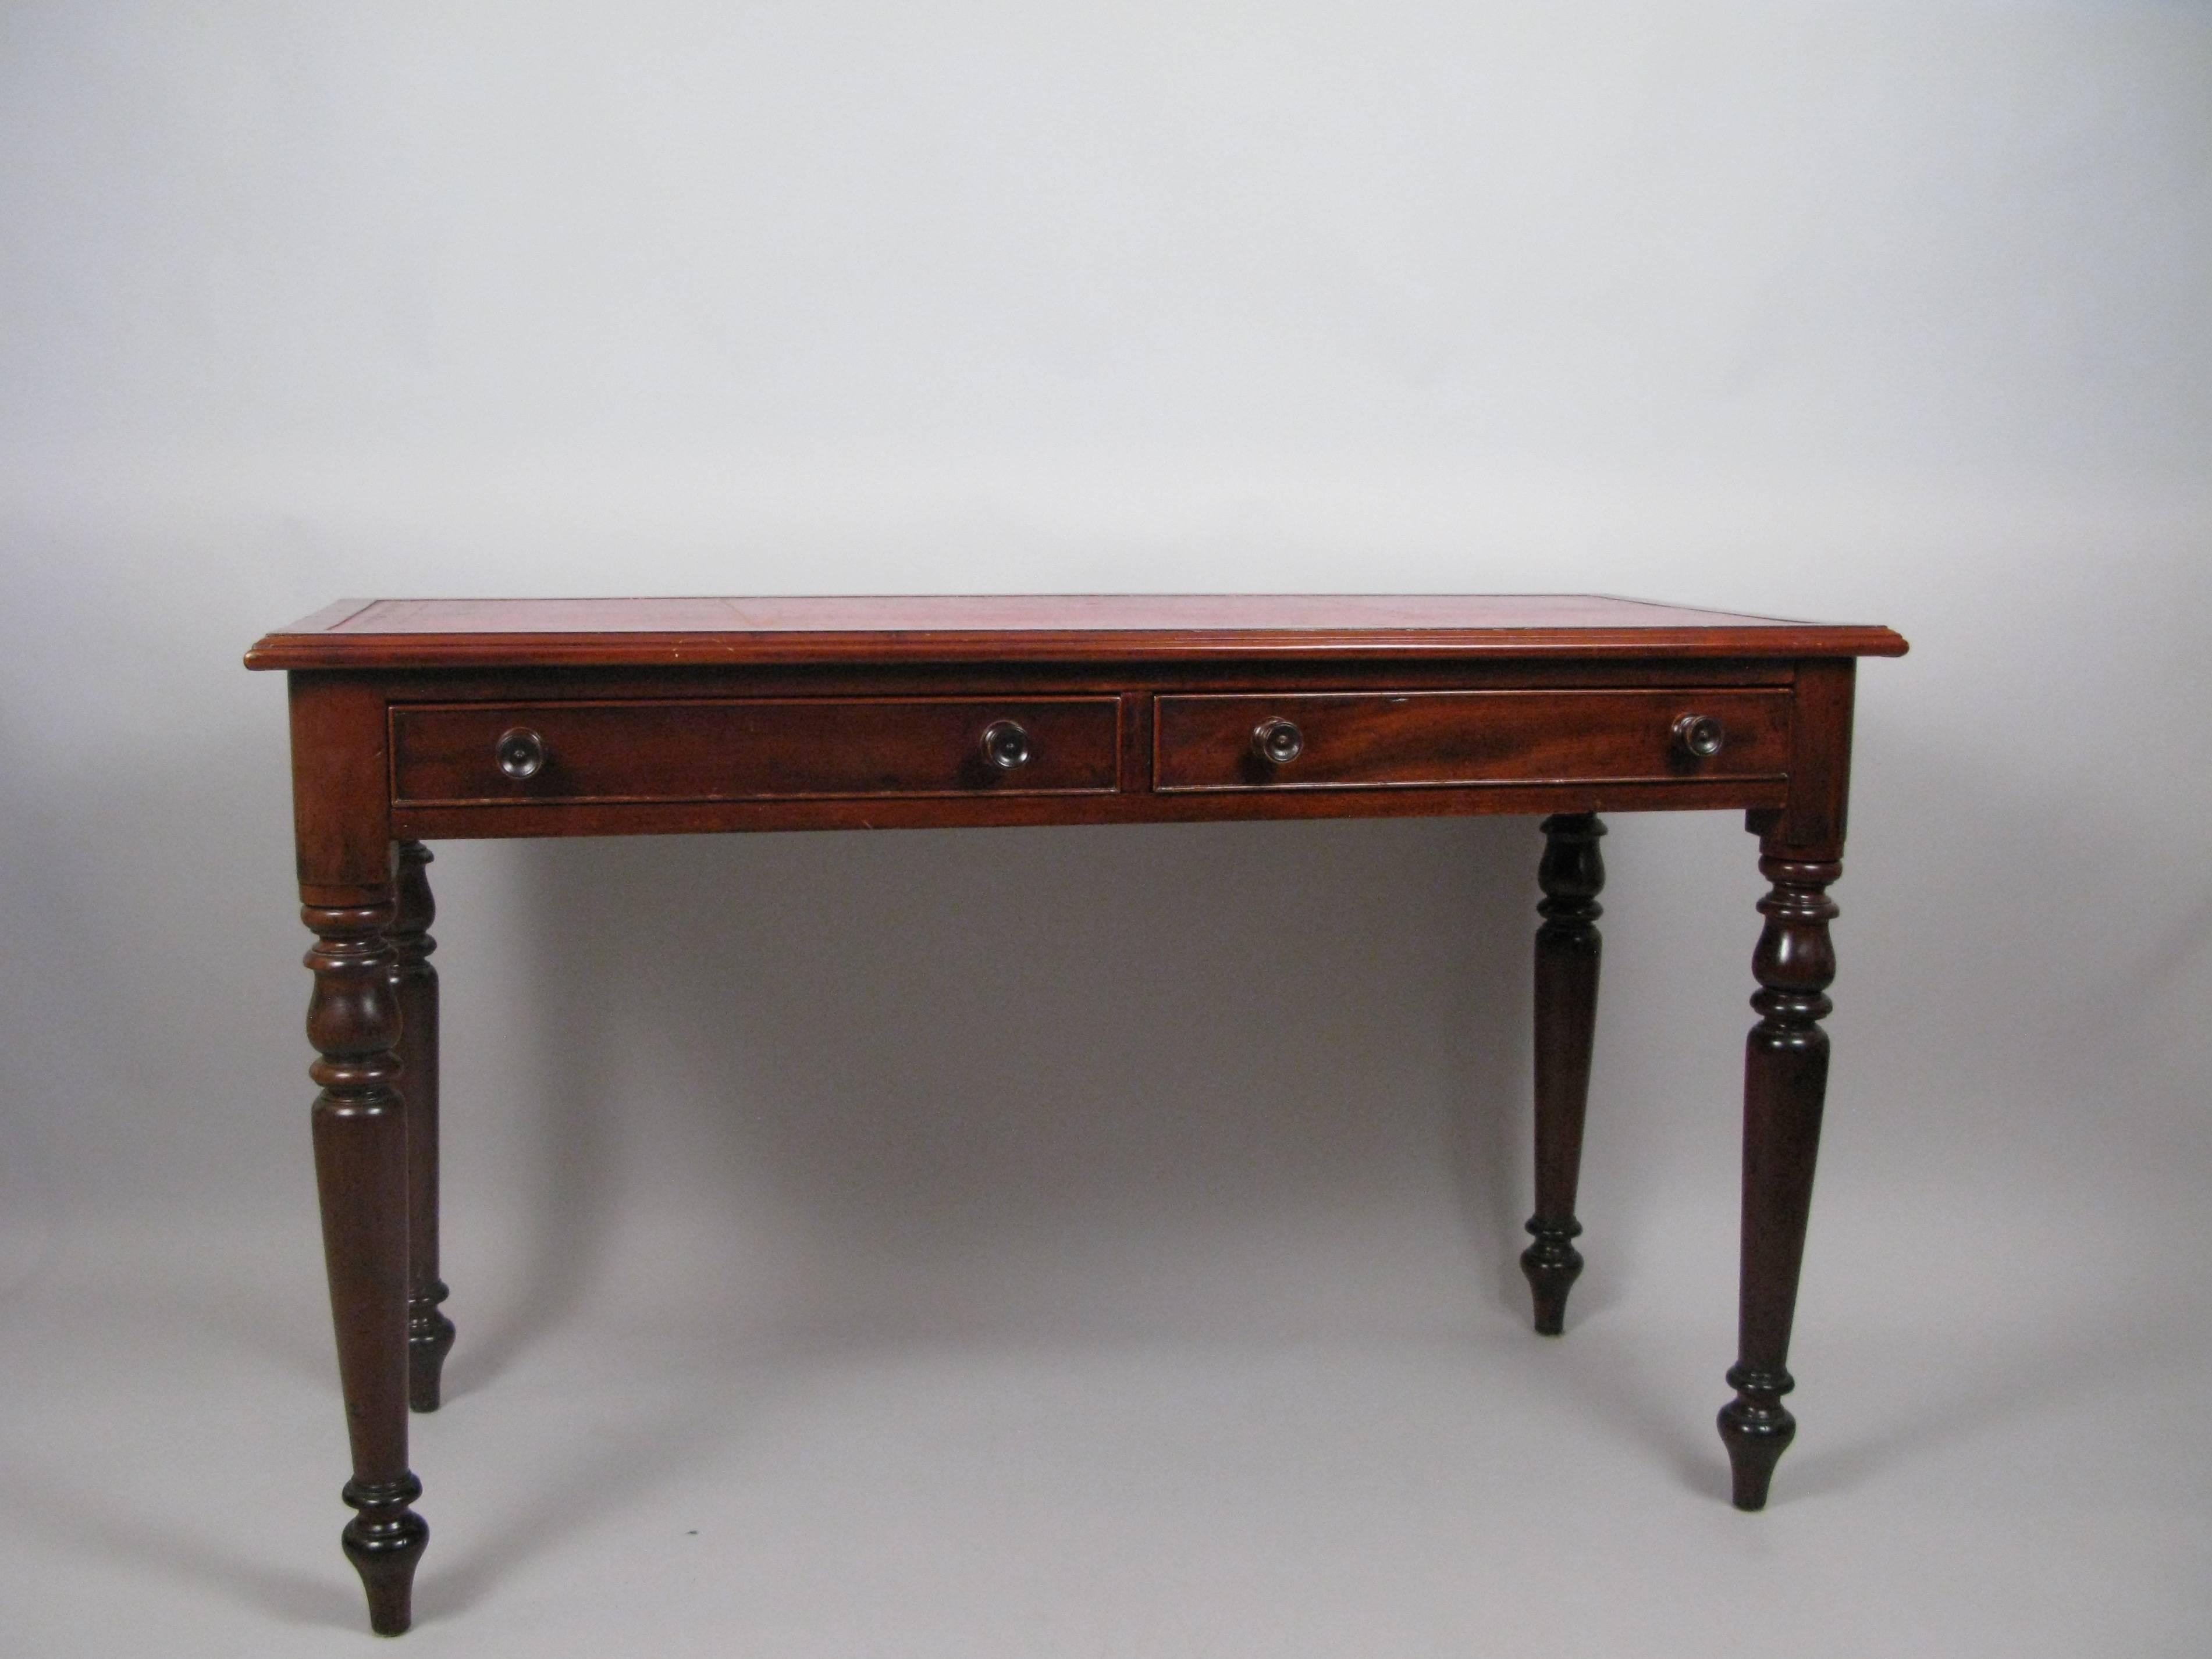 Handsome and useful writing desk. A good, compact size for computer work with surface and drawer space. English, mid-19th century and understated, but elegant, turned legs.